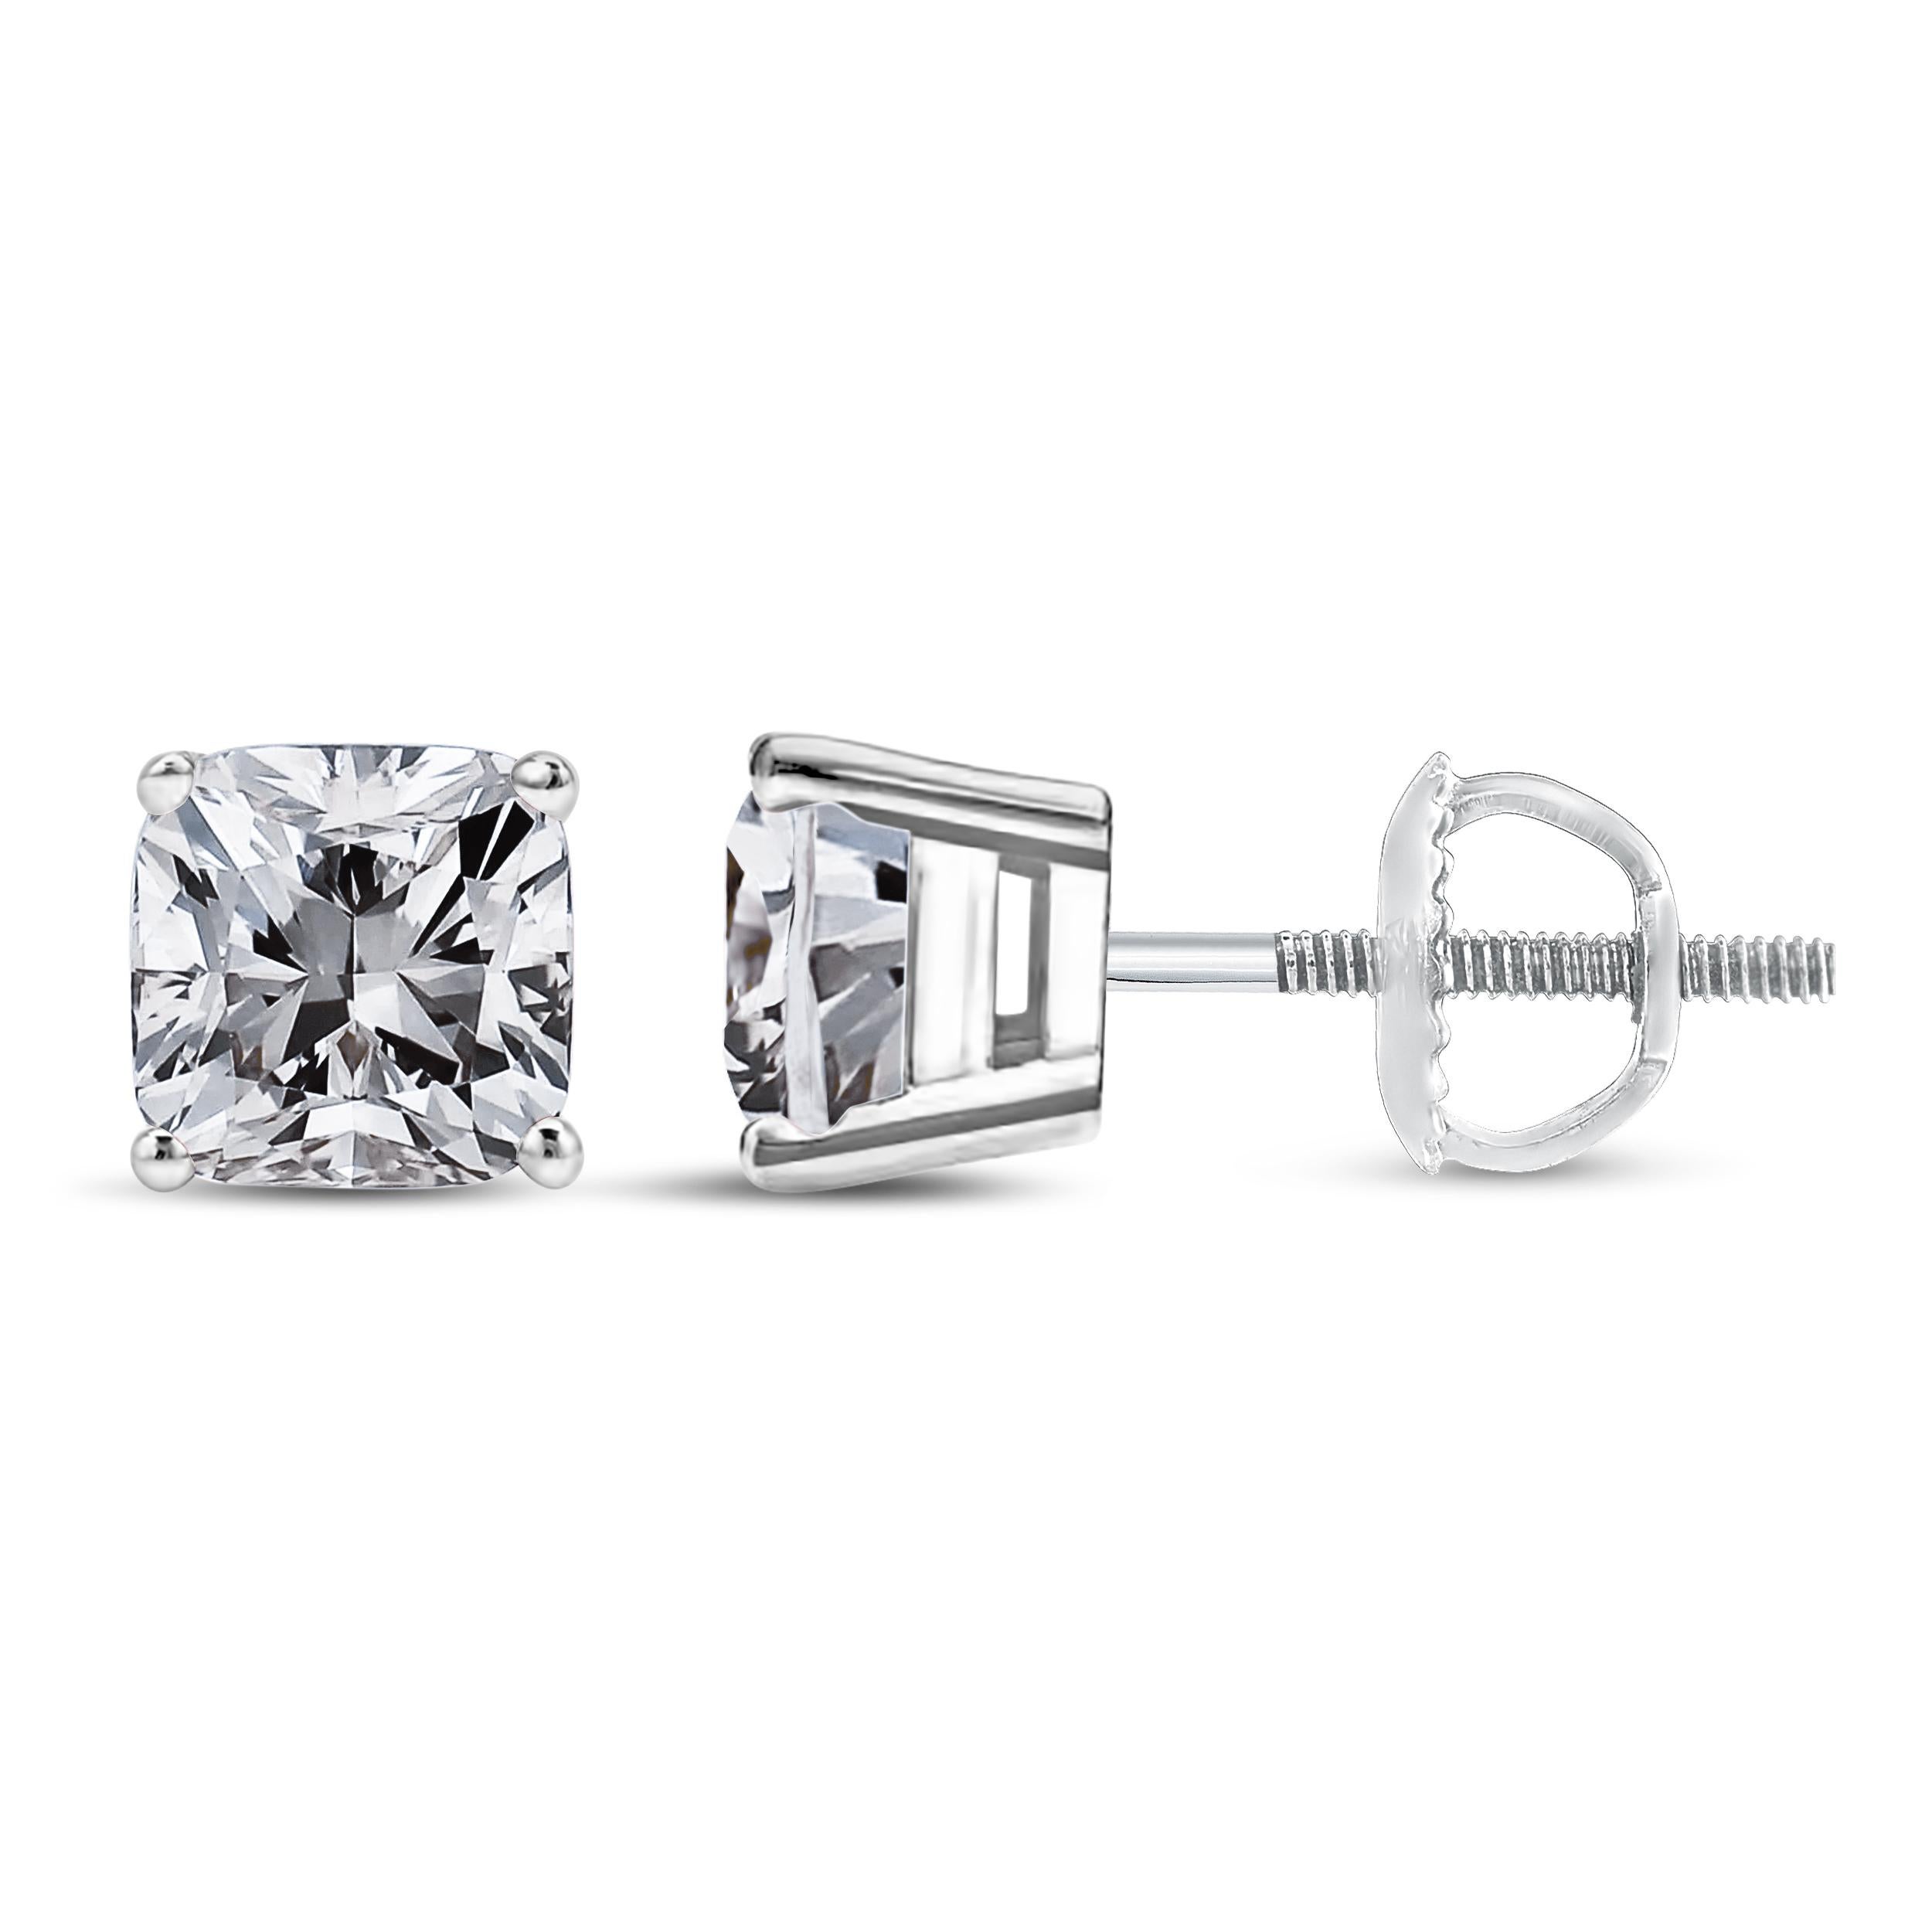 Diamond stud earrings are a classic and timeless accessory that every woman should have in her jewelry collection. These 14K white gold studs feature two princess cut diamonds that have been clarity enhanced, totaling 1 1/2 carats. Each diamond is